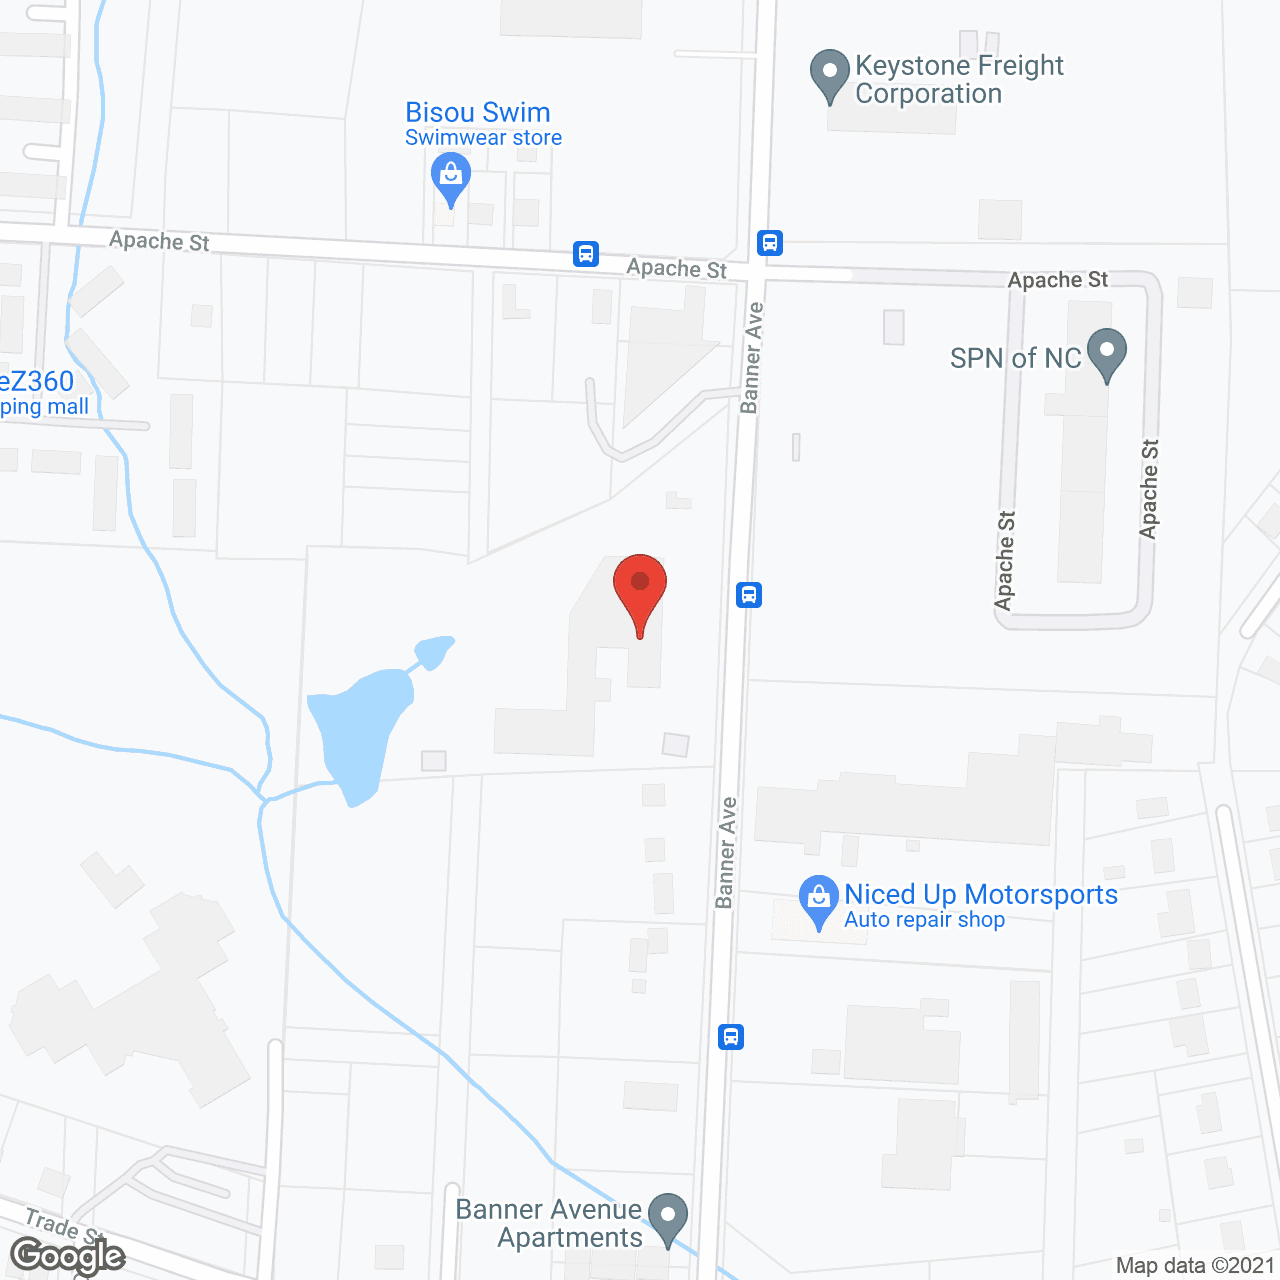 Arbor Care Assisted Living in google map